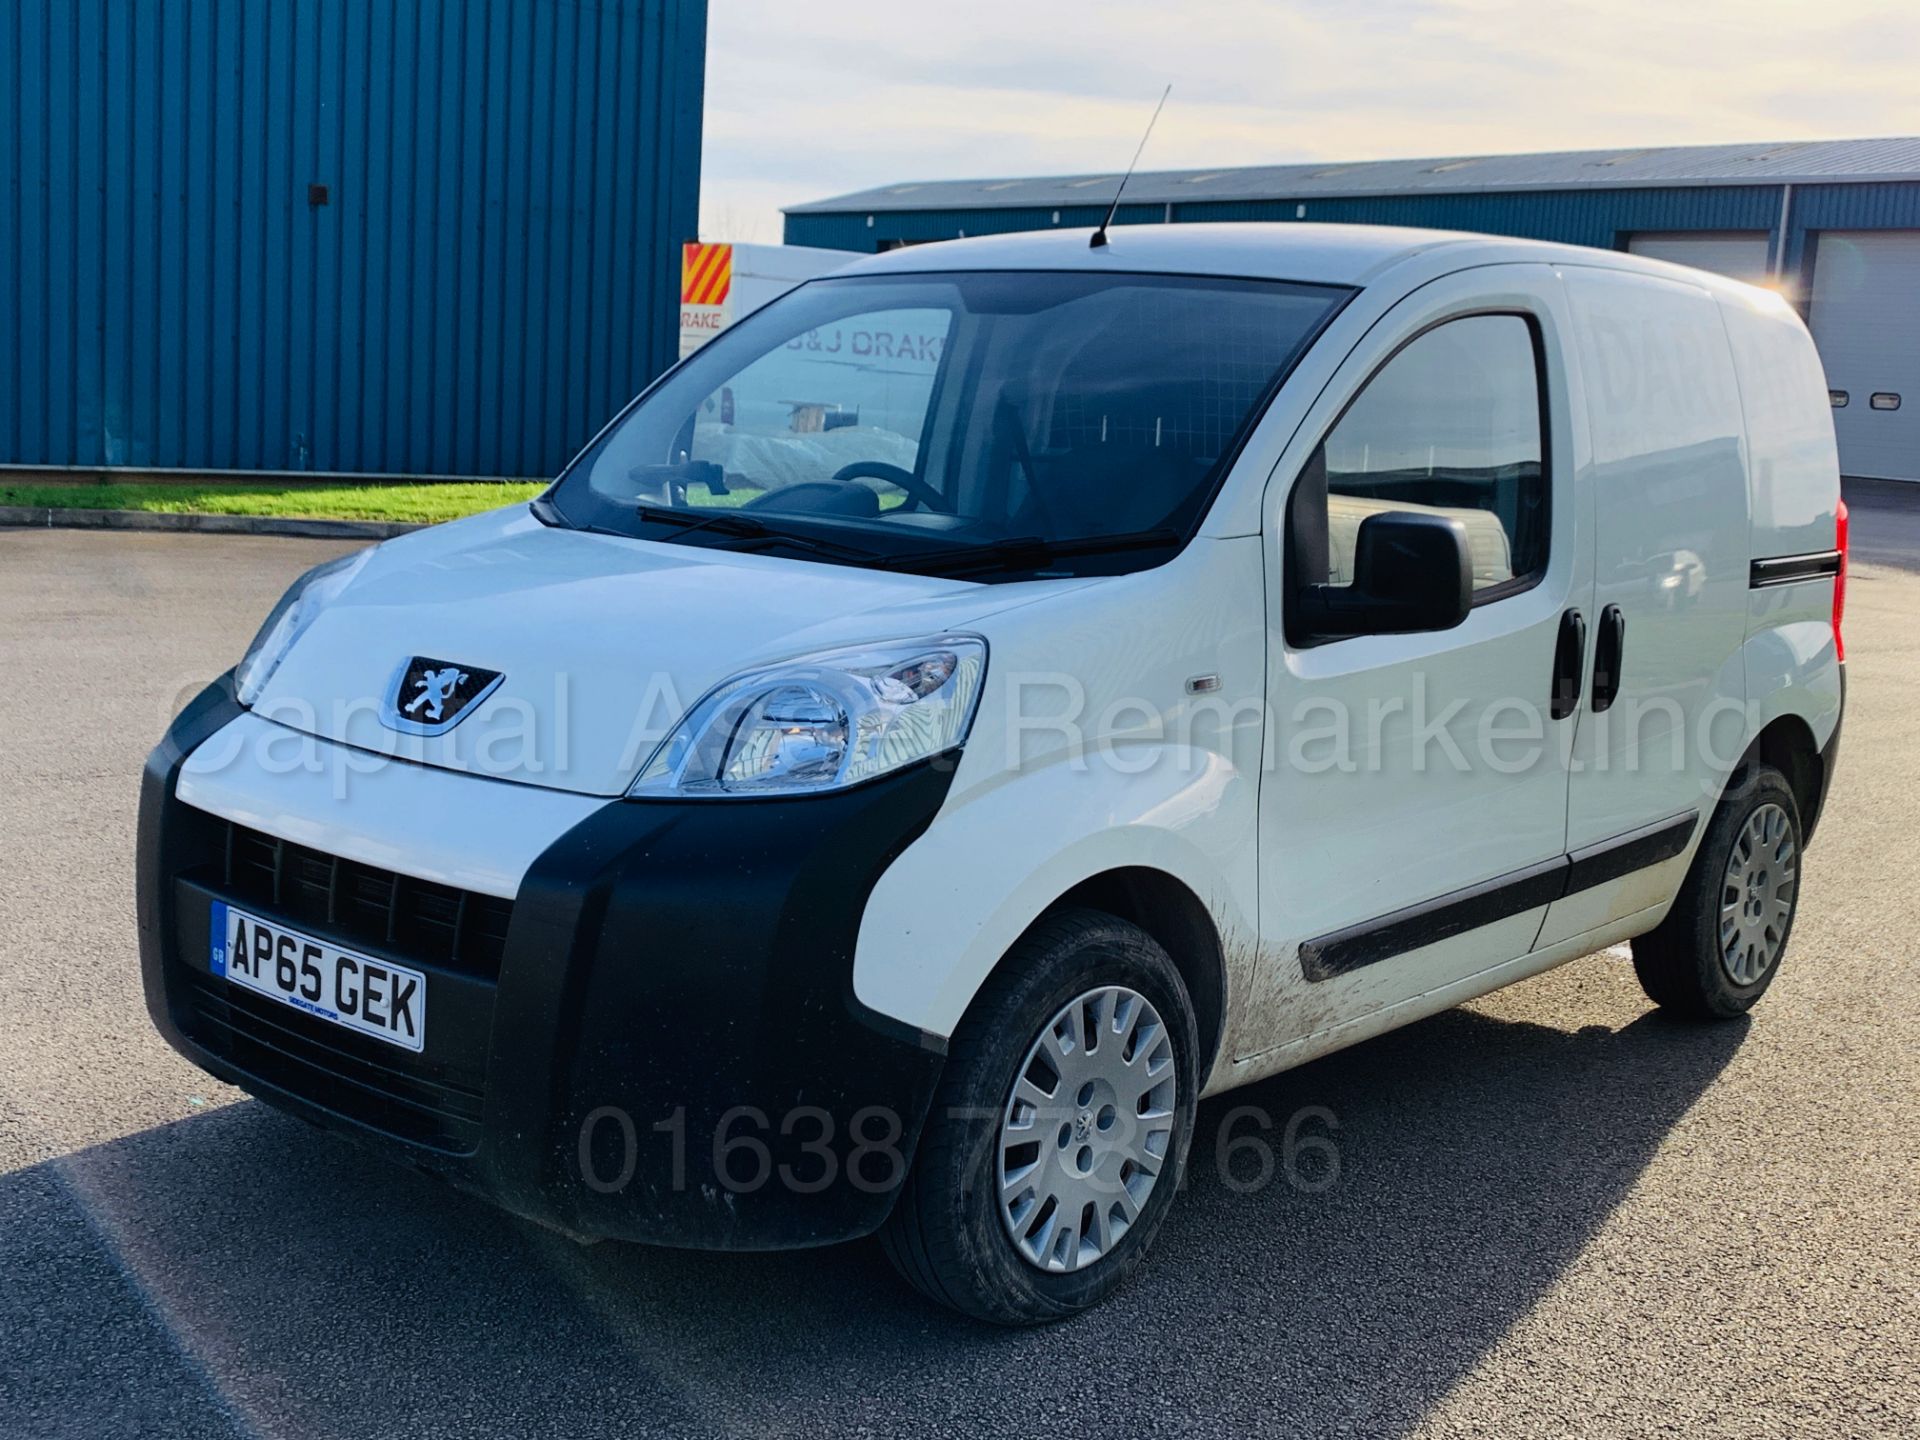 (On Sale) PEUGEOT BIPPER *PROFESSIONAL* LCV - PANEL VAN (65 REG) 'HDI - 5 SPEED' (1 OWNER) *AIR CON* - Image 4 of 36